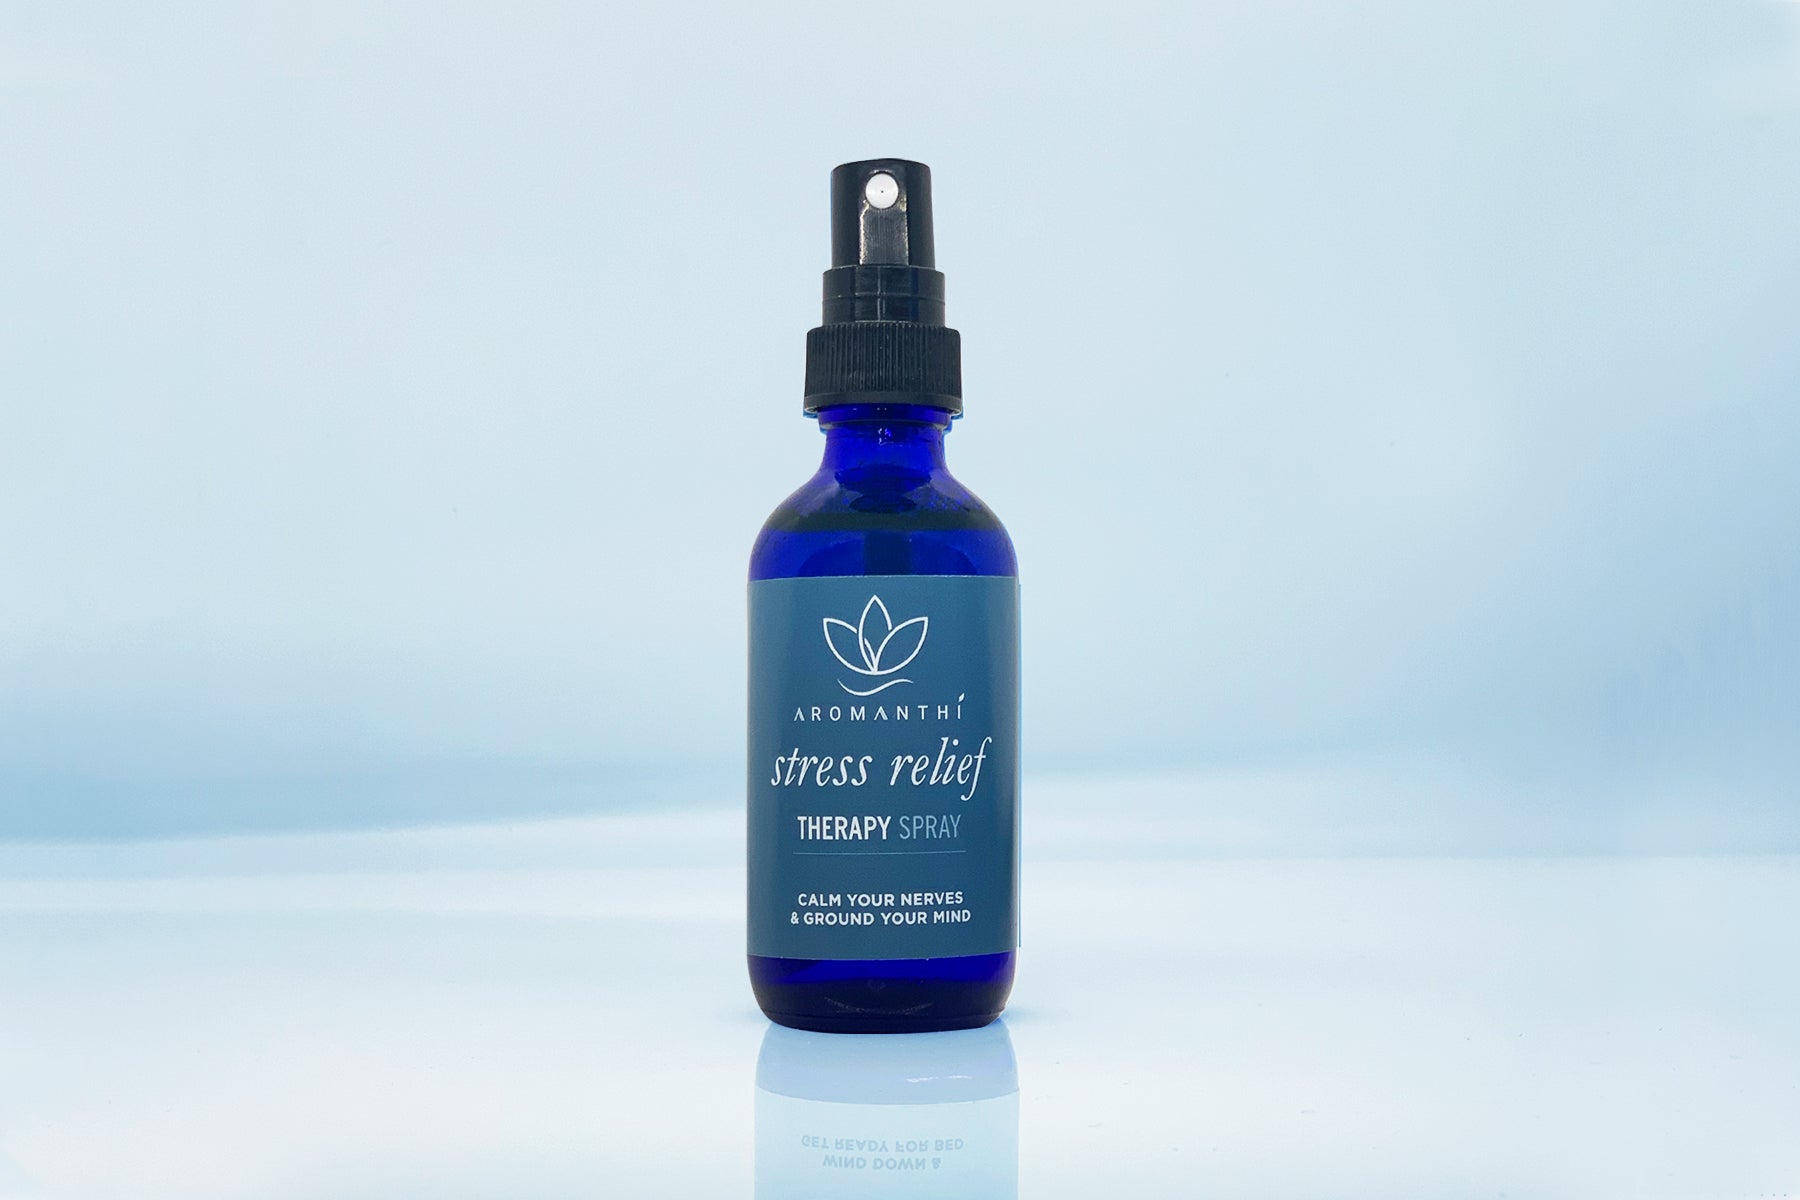 Shop Aromanthi Therapeutic Sprays. The sleep and stress-relief blends can be used to spray anywhere and serve as a clean beauty mist with natural essential oil ingredients. Click here to shop products.